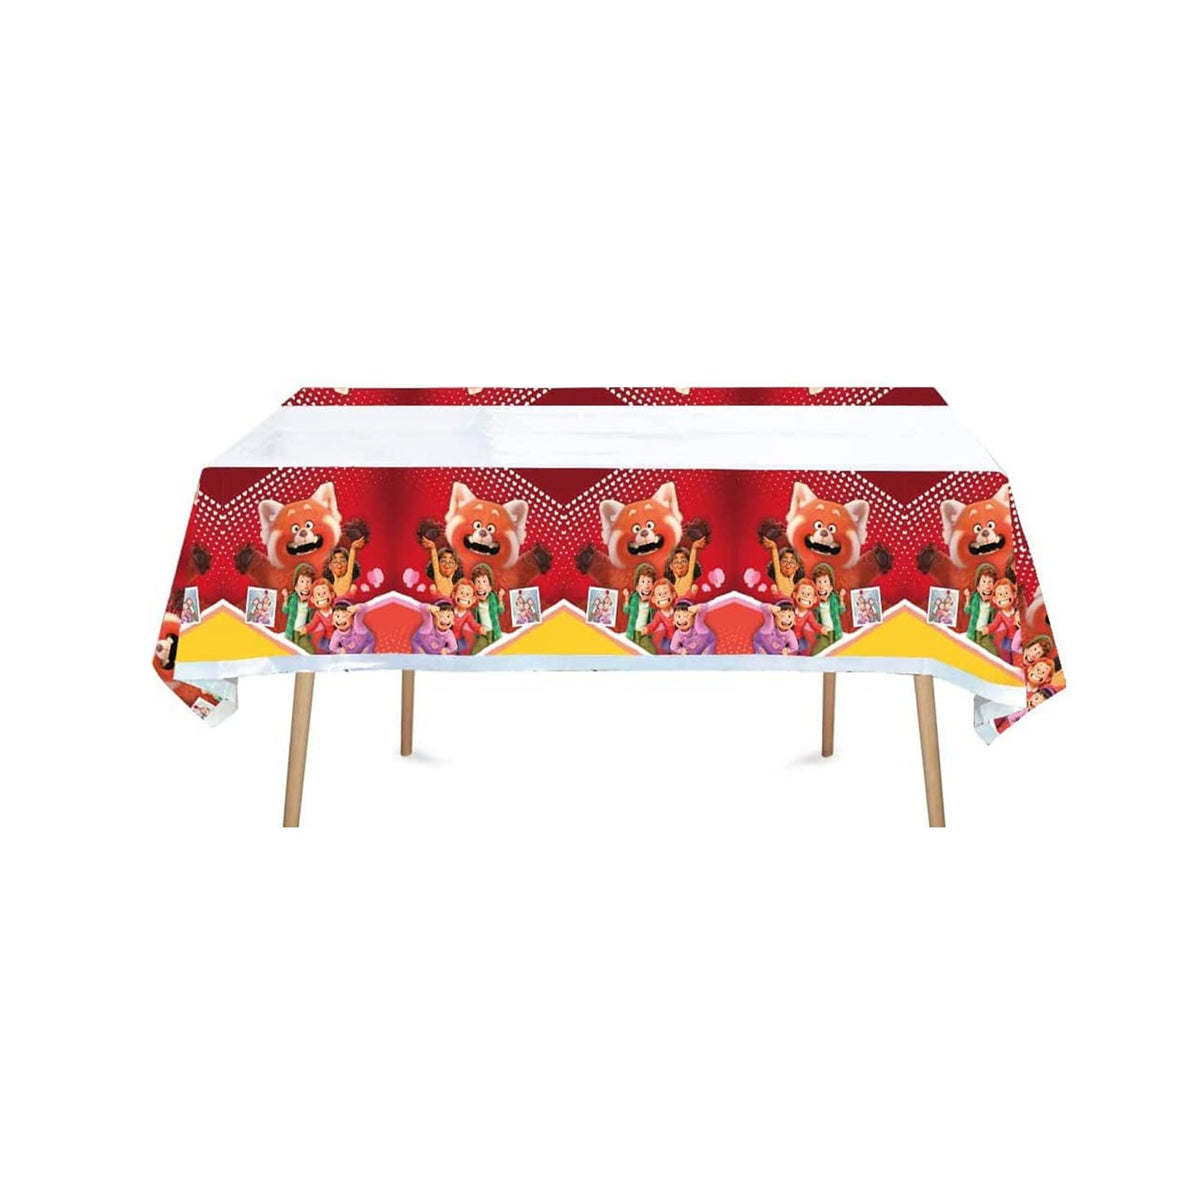 Shaoxing Keqiao Chengyou Textile Co.,Ltd Kids Birthday Turning Red Birthday Rectangular Plastic Table Cover, 51 x 86 Inches 810077656969